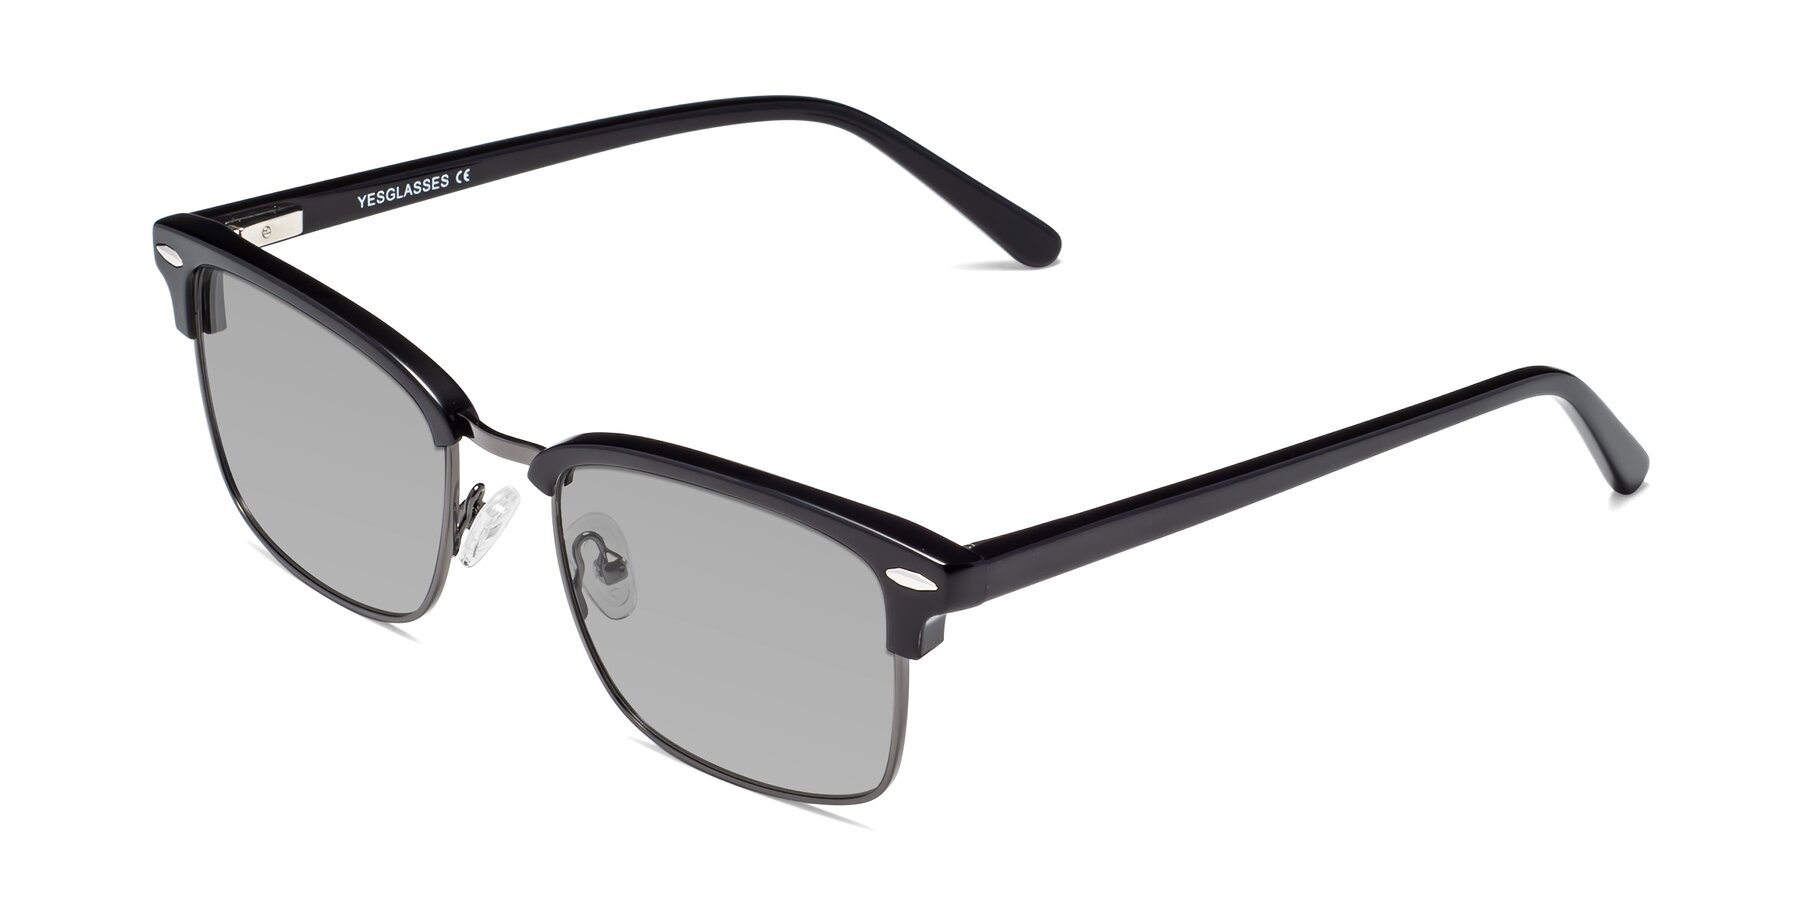 Angle of 17464 in Black-Gunmetal with Light Gray Tinted Lenses